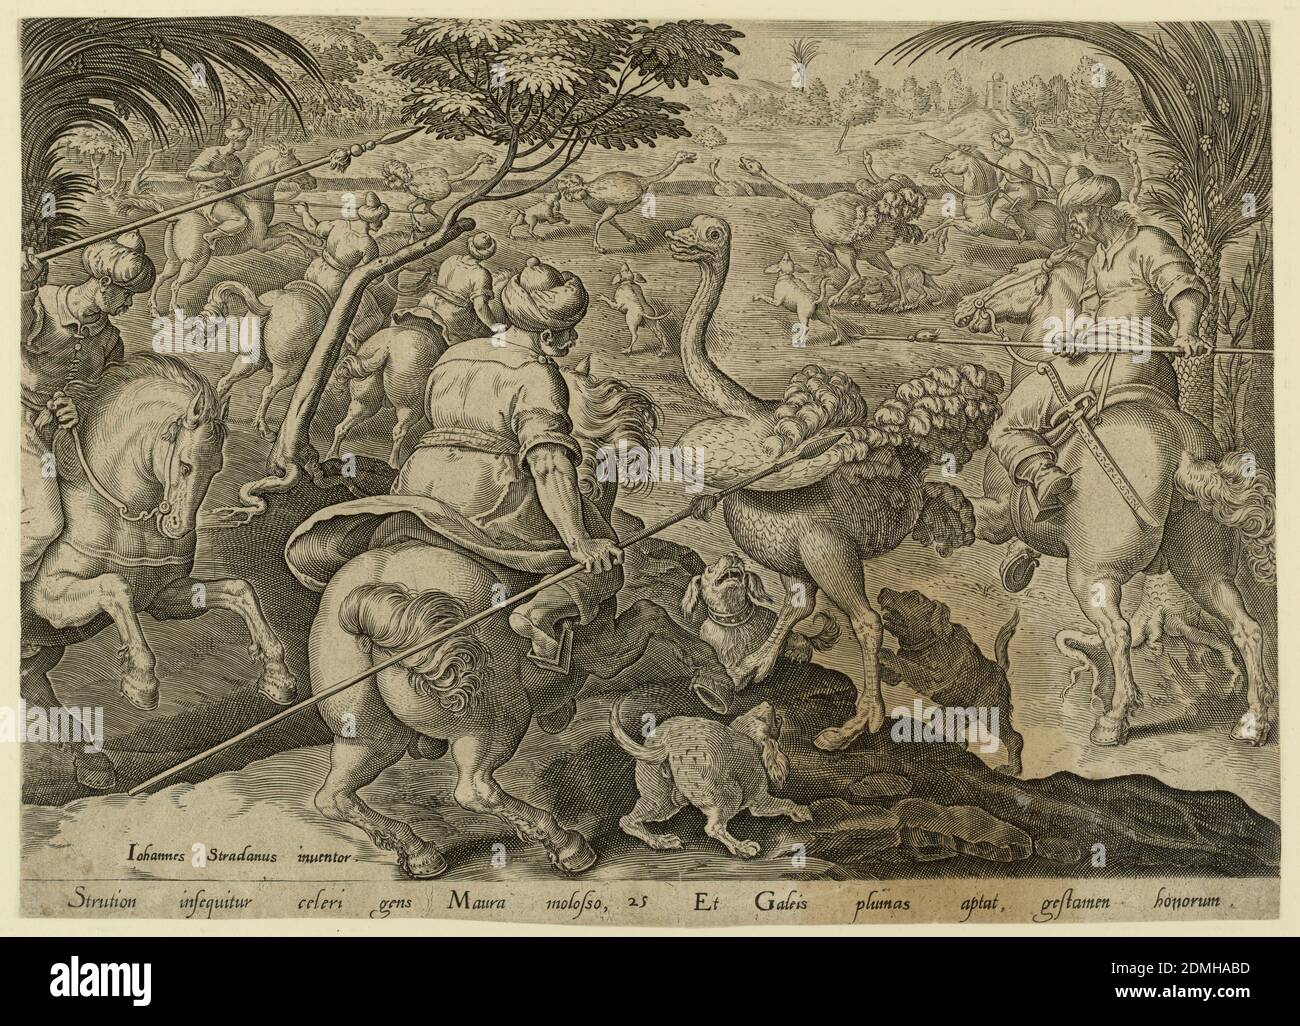 The Ostrich Hunt, Jan van der Straet, called Stradanus, Flemish, 1523–1605,  Philips Galle, Flemish, 1537 - 1612, Engraving on laid paper, Horizontal  rectangle. Horsemen and dogs hunting ostriches. At lower left: 'Iohannes